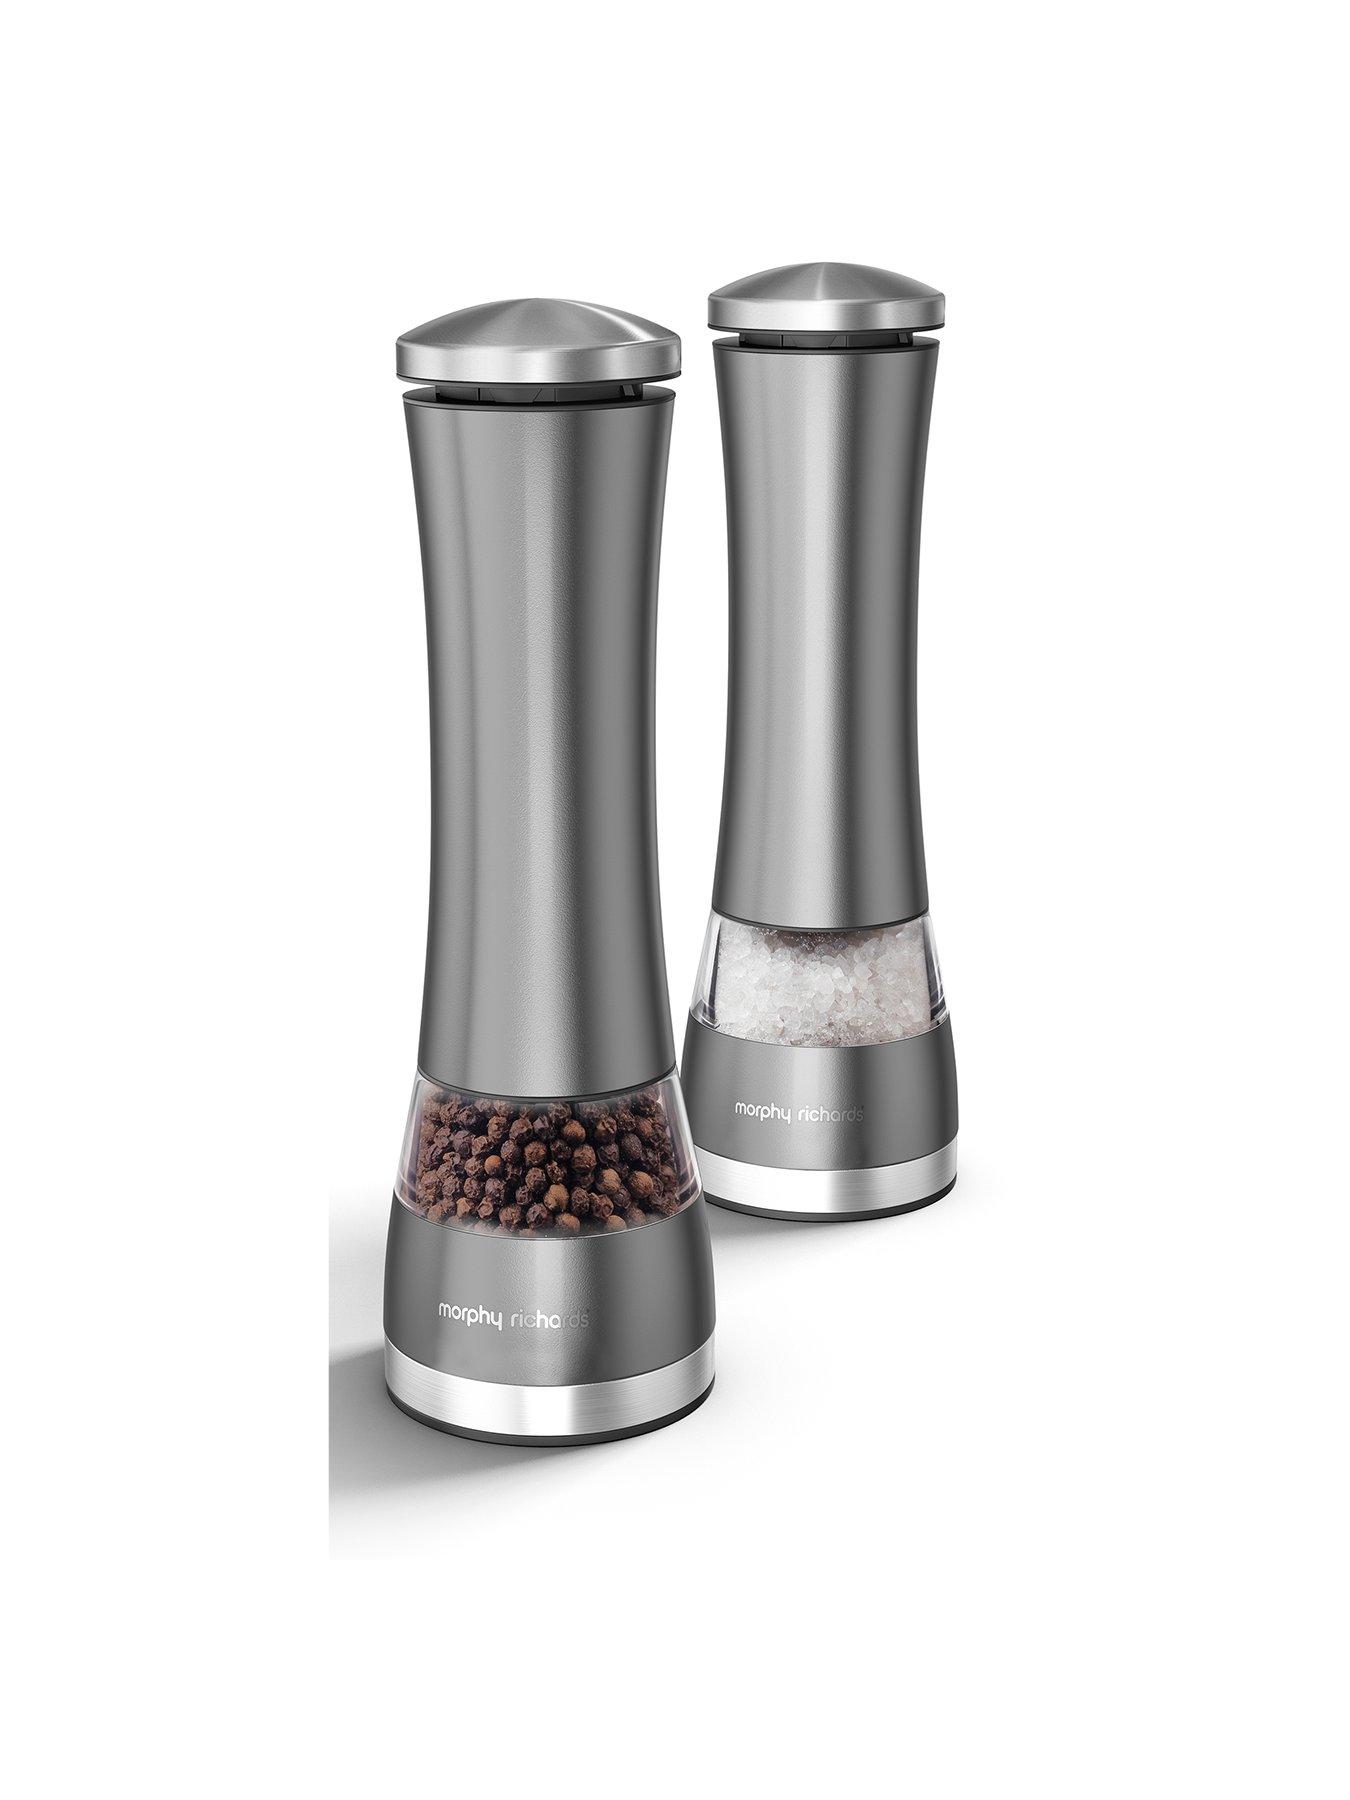 Automatic Salt or Pepper Mills - The Active Hands Company